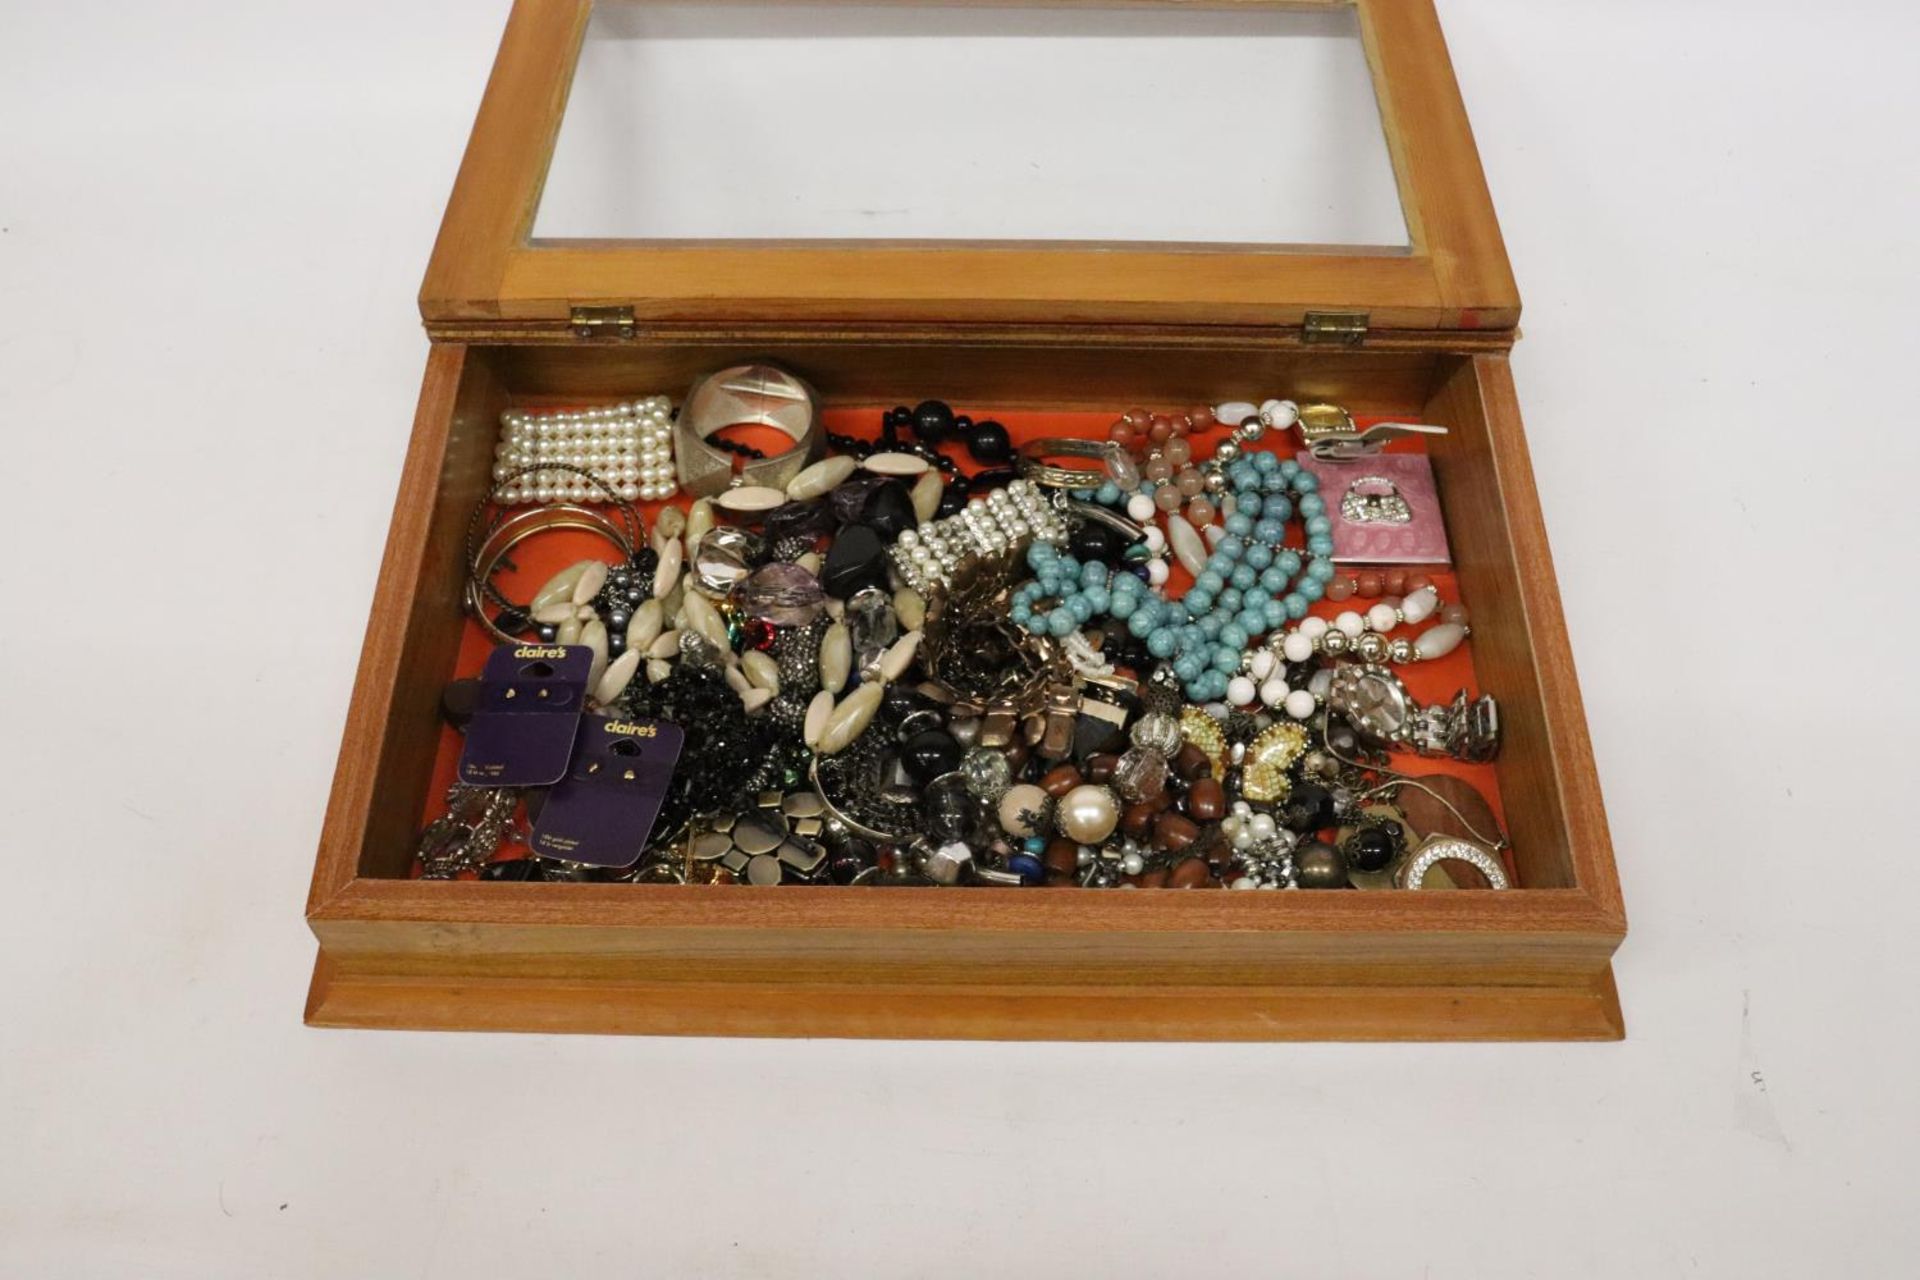 A QUANTITY OF COSTUME JEWELLERY IN A GLASS TOPPED DISPLAY CASE - Image 2 of 6